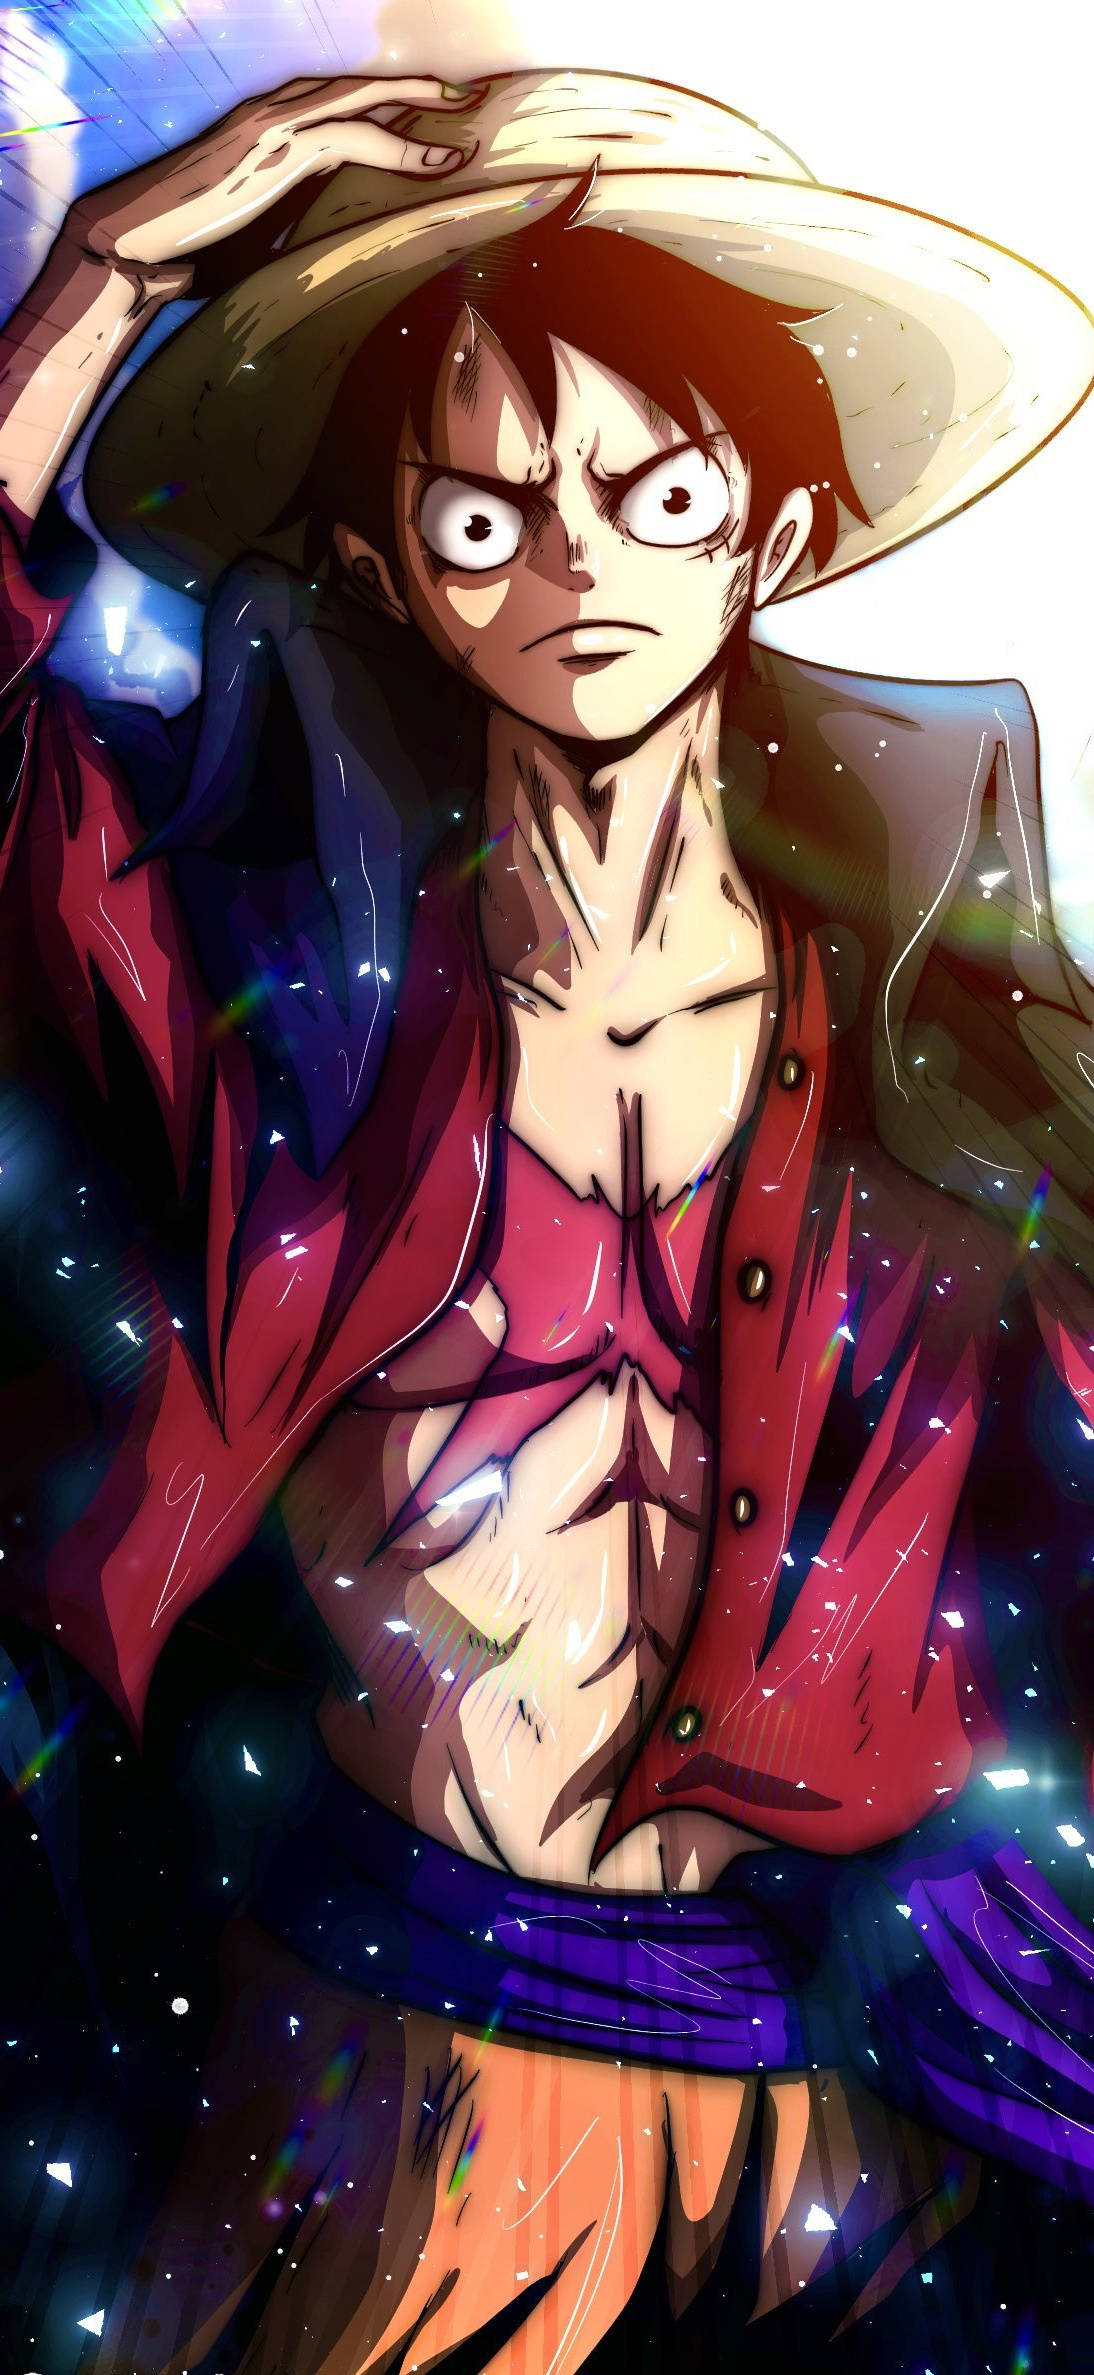 Cool Anime Photo Luffy Of One Piece Wallpaper